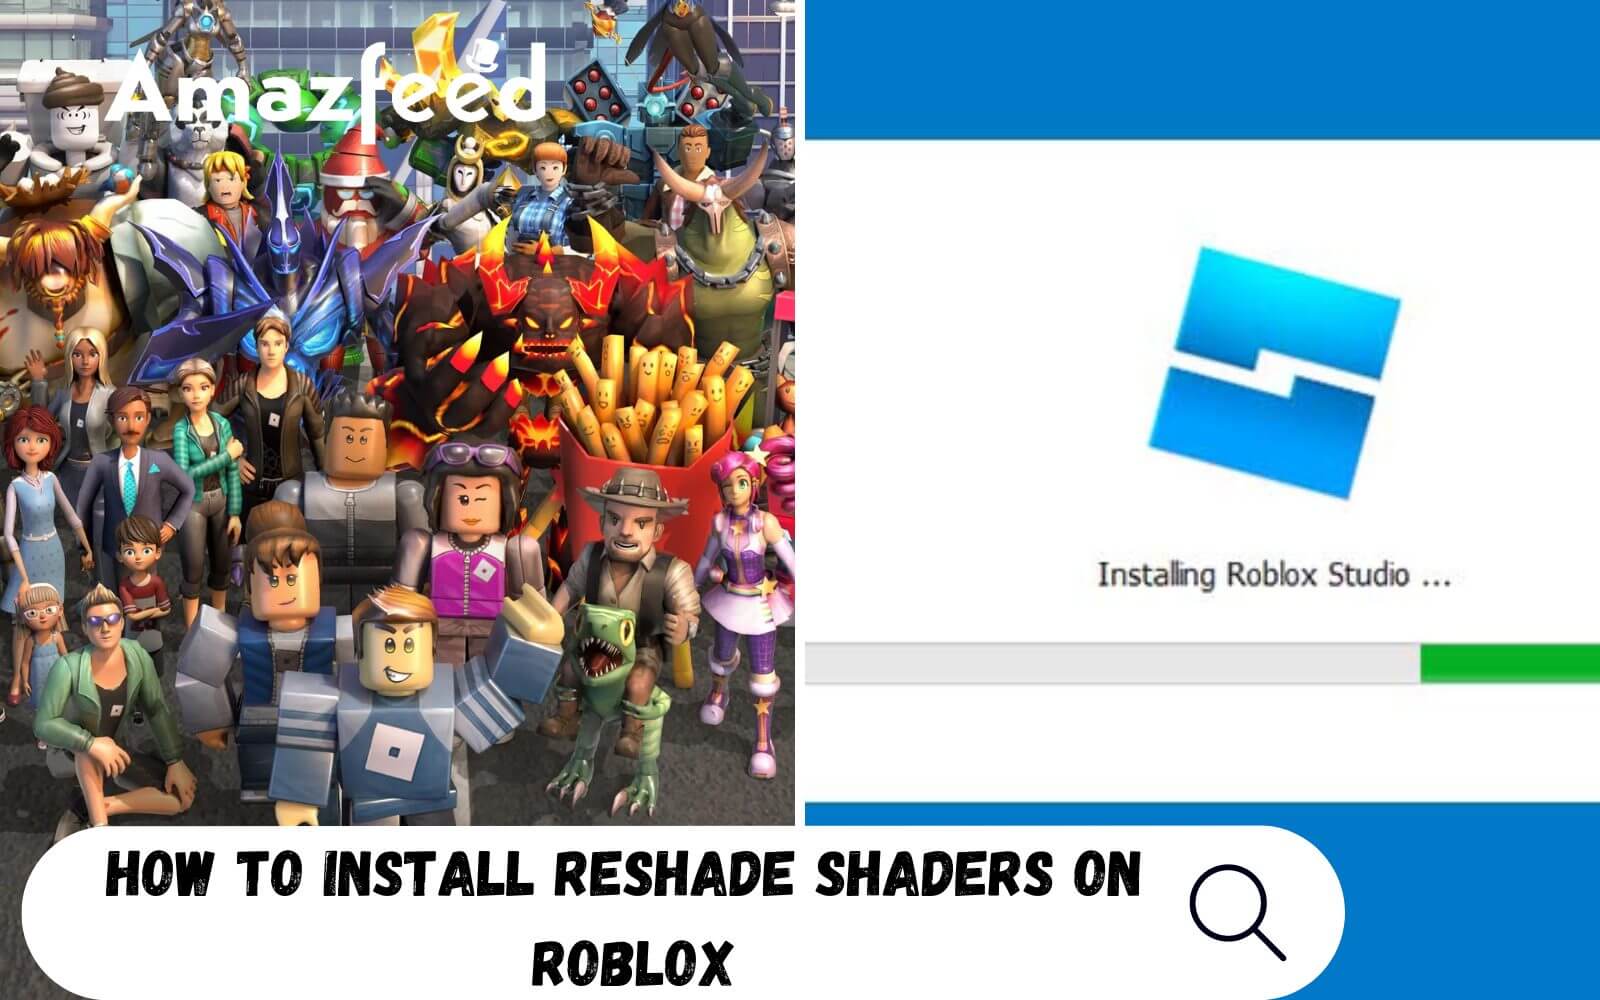 How to install Reshade shaders on Roblox (1)